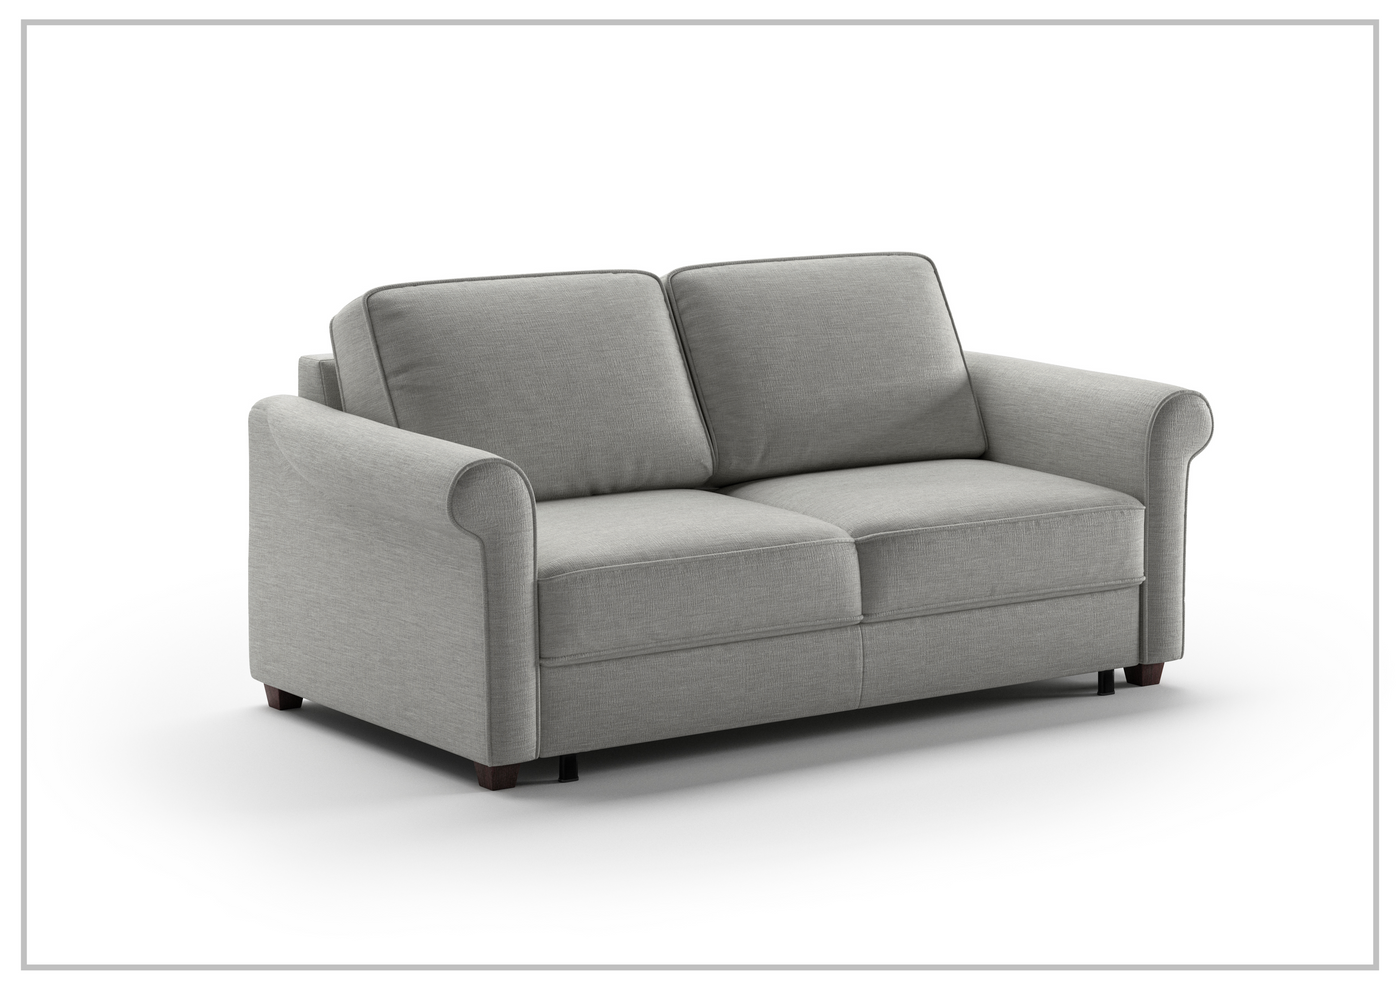 Luonto Charleston Sleeper Sofa in Oliver 173 (King/Queen)